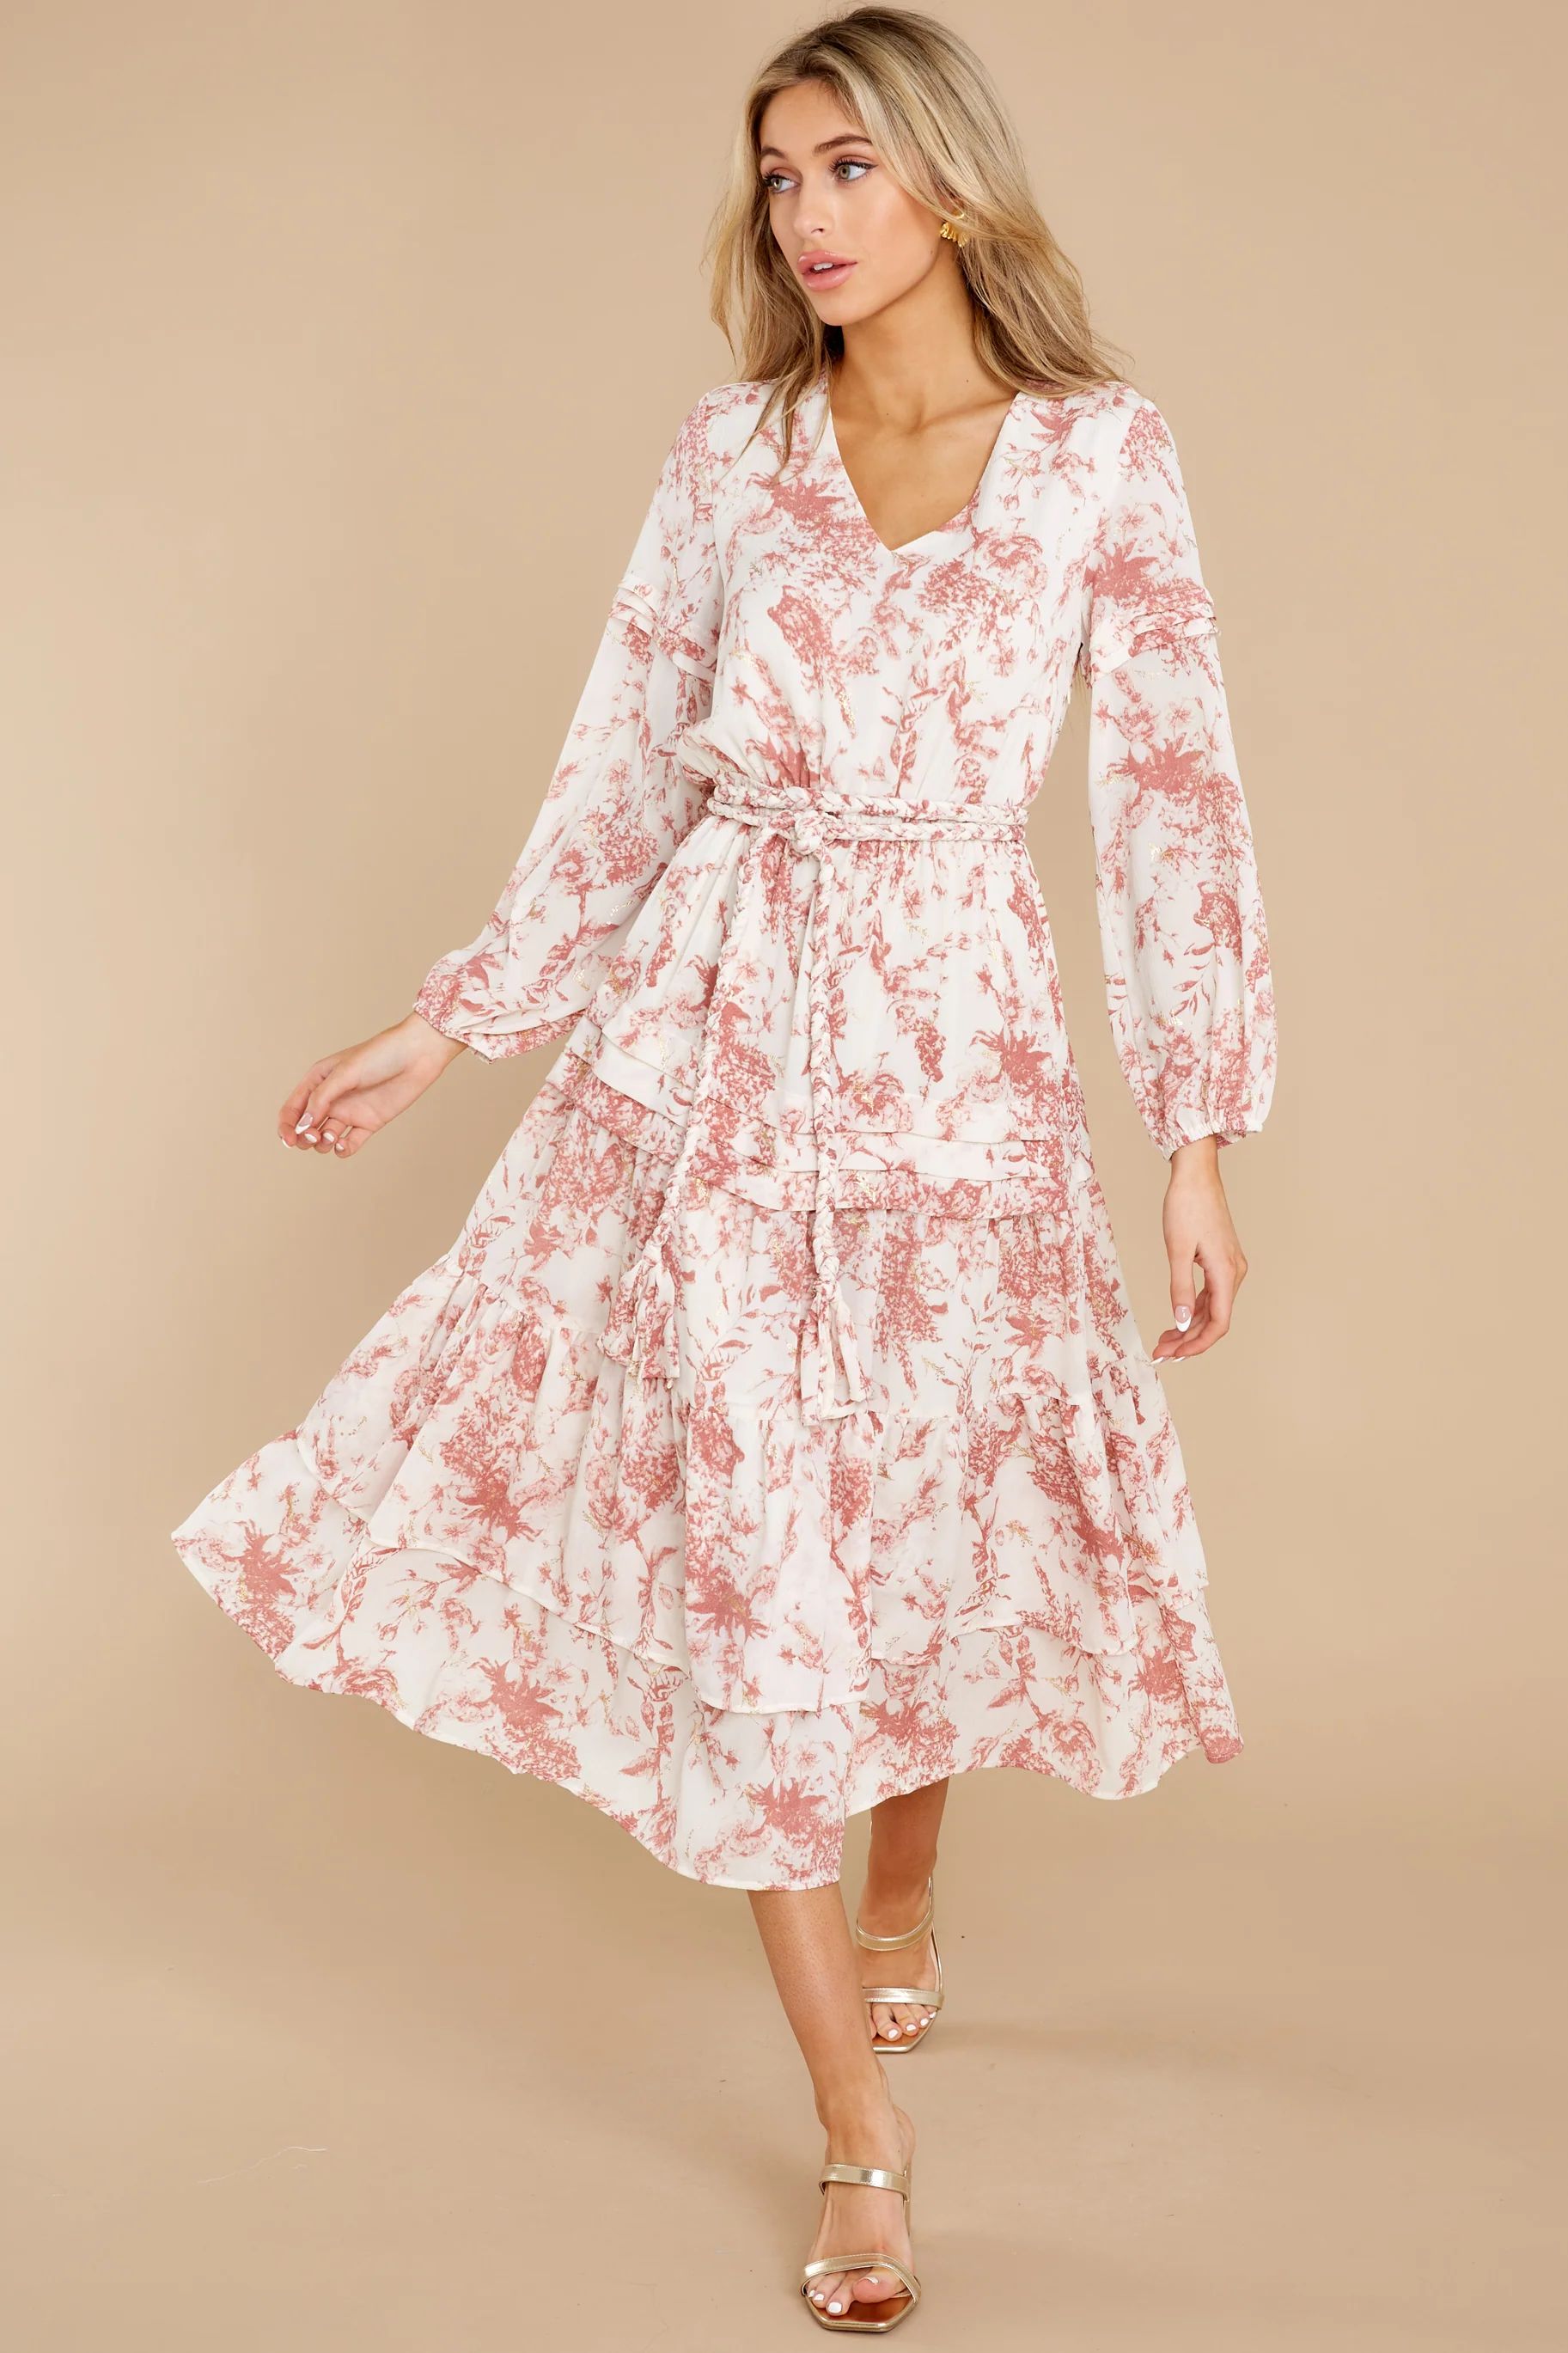 All The Best Ivory And Pink Floral Print Maxi Dress | Red Dress 